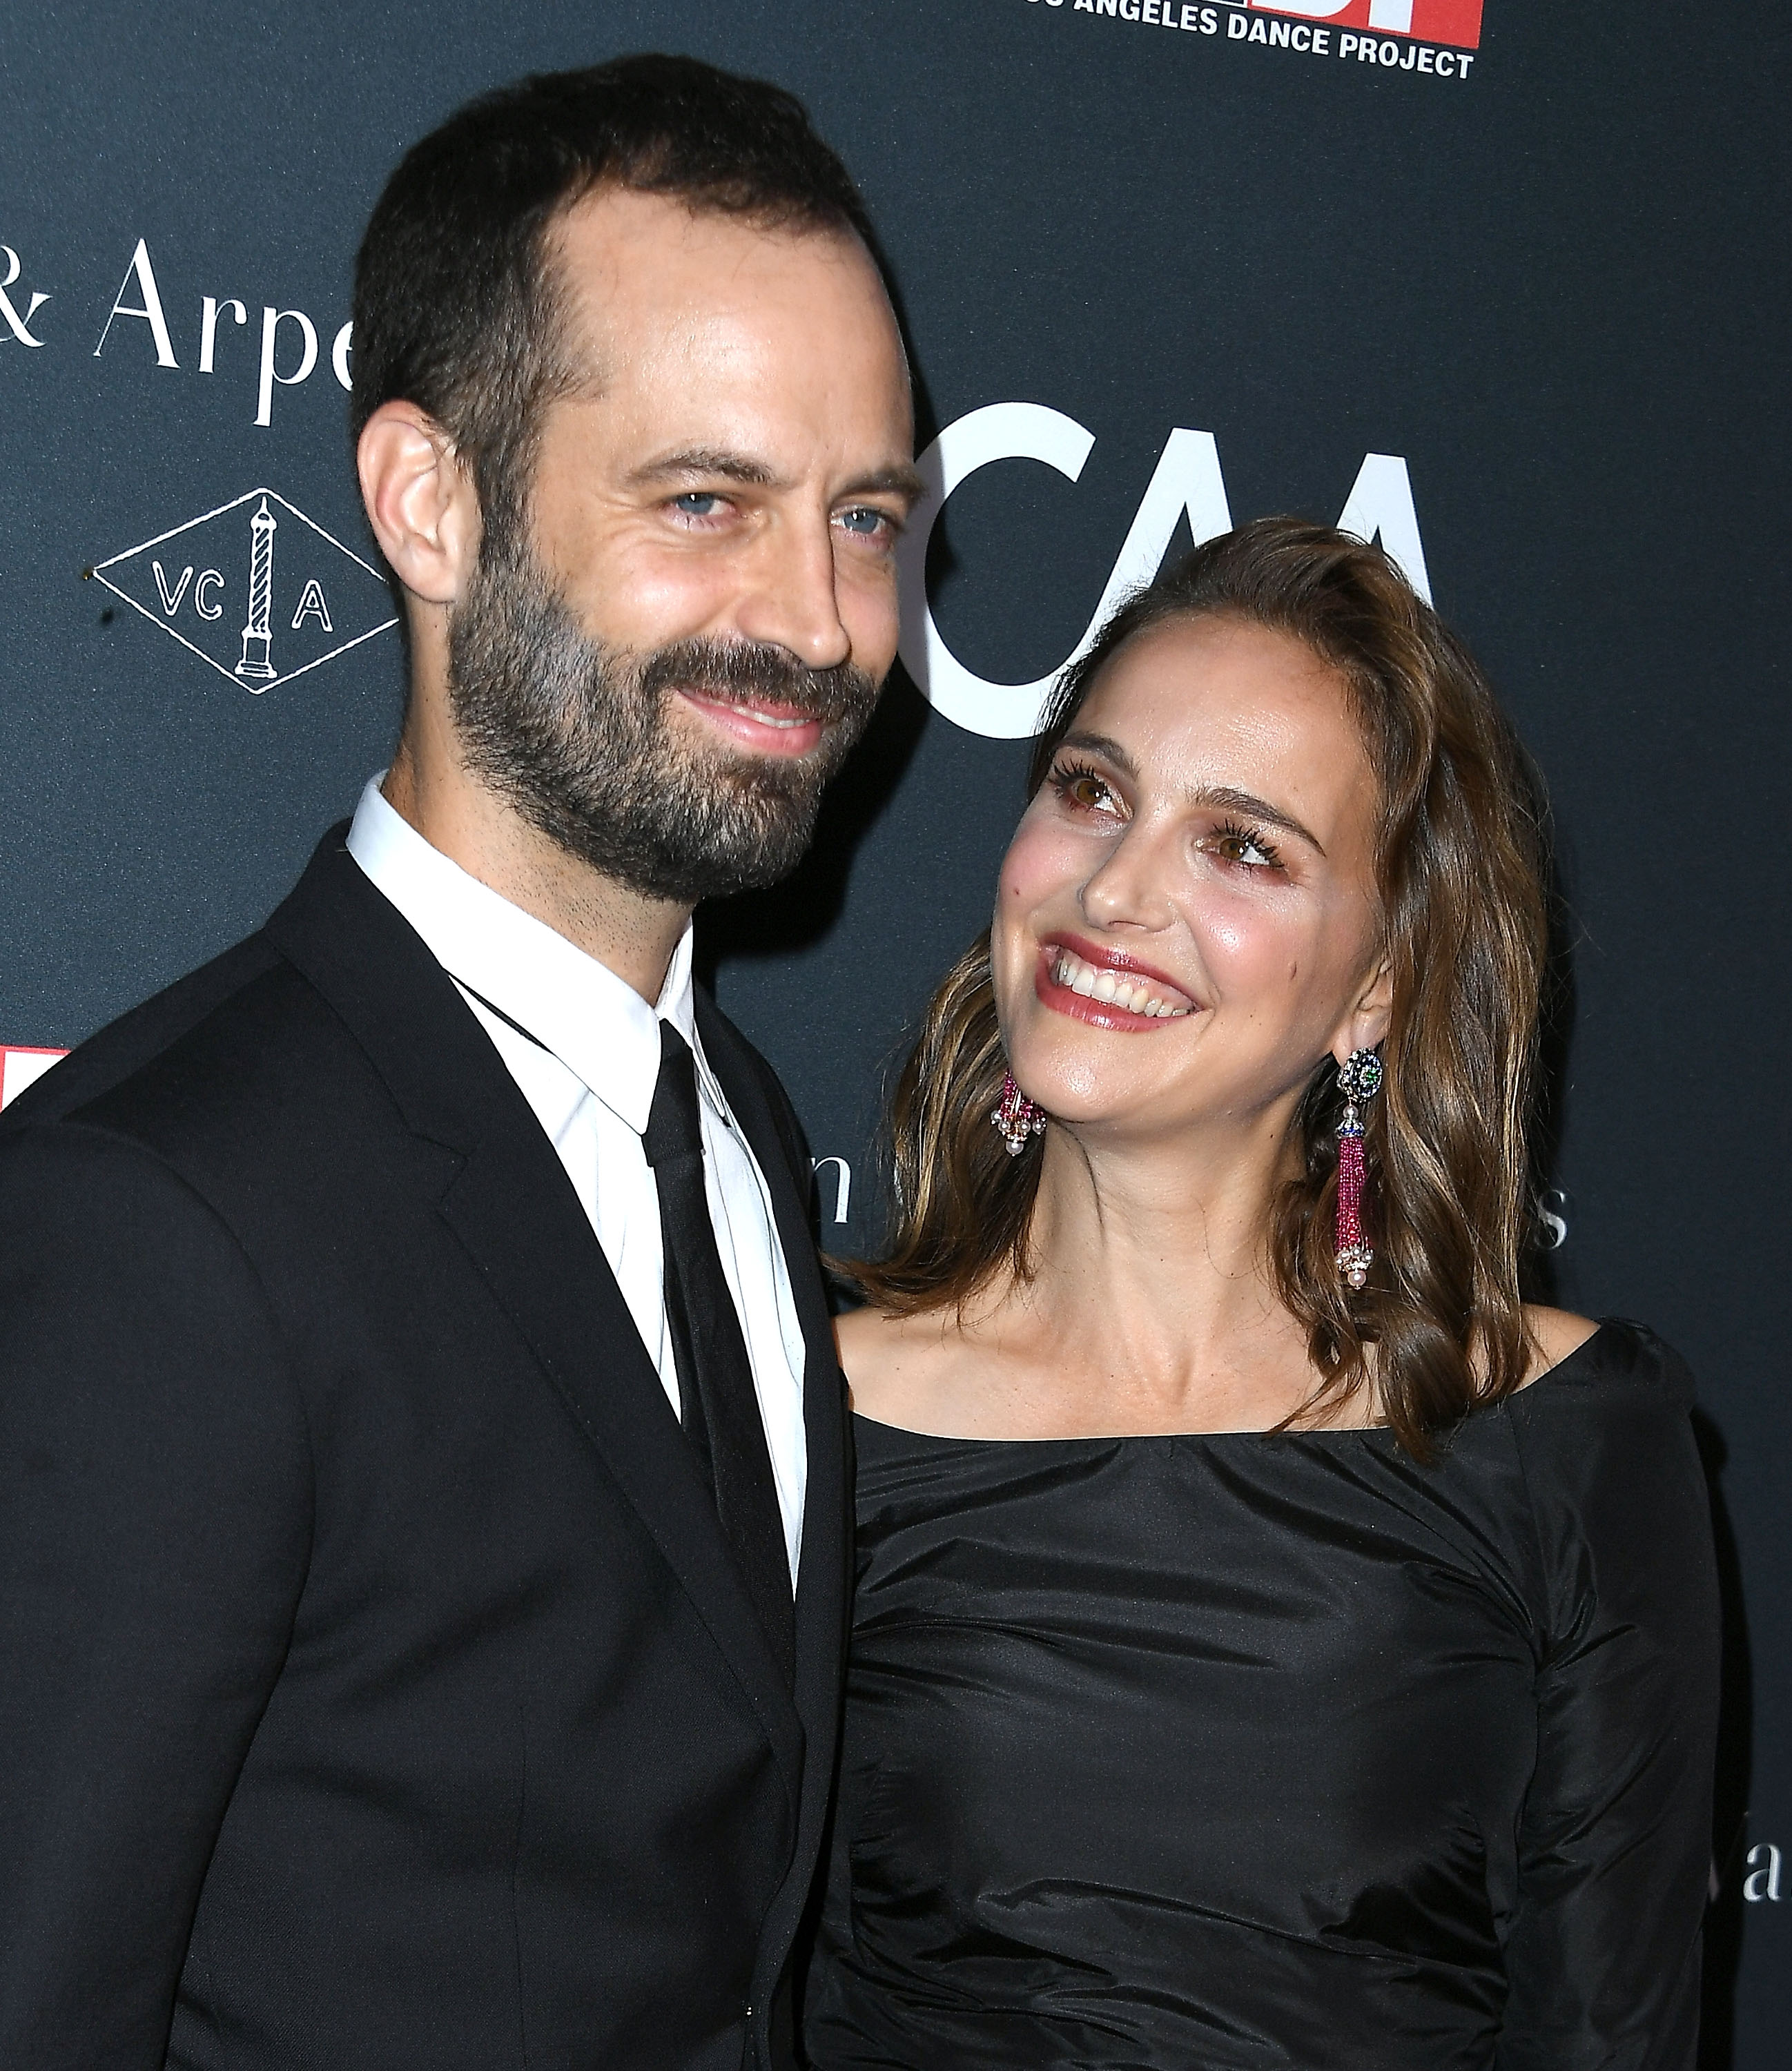 Benjamin Millepied and Natalie Portman in Los Angeles, California on October 7, 2017 | Source: Getty Images 